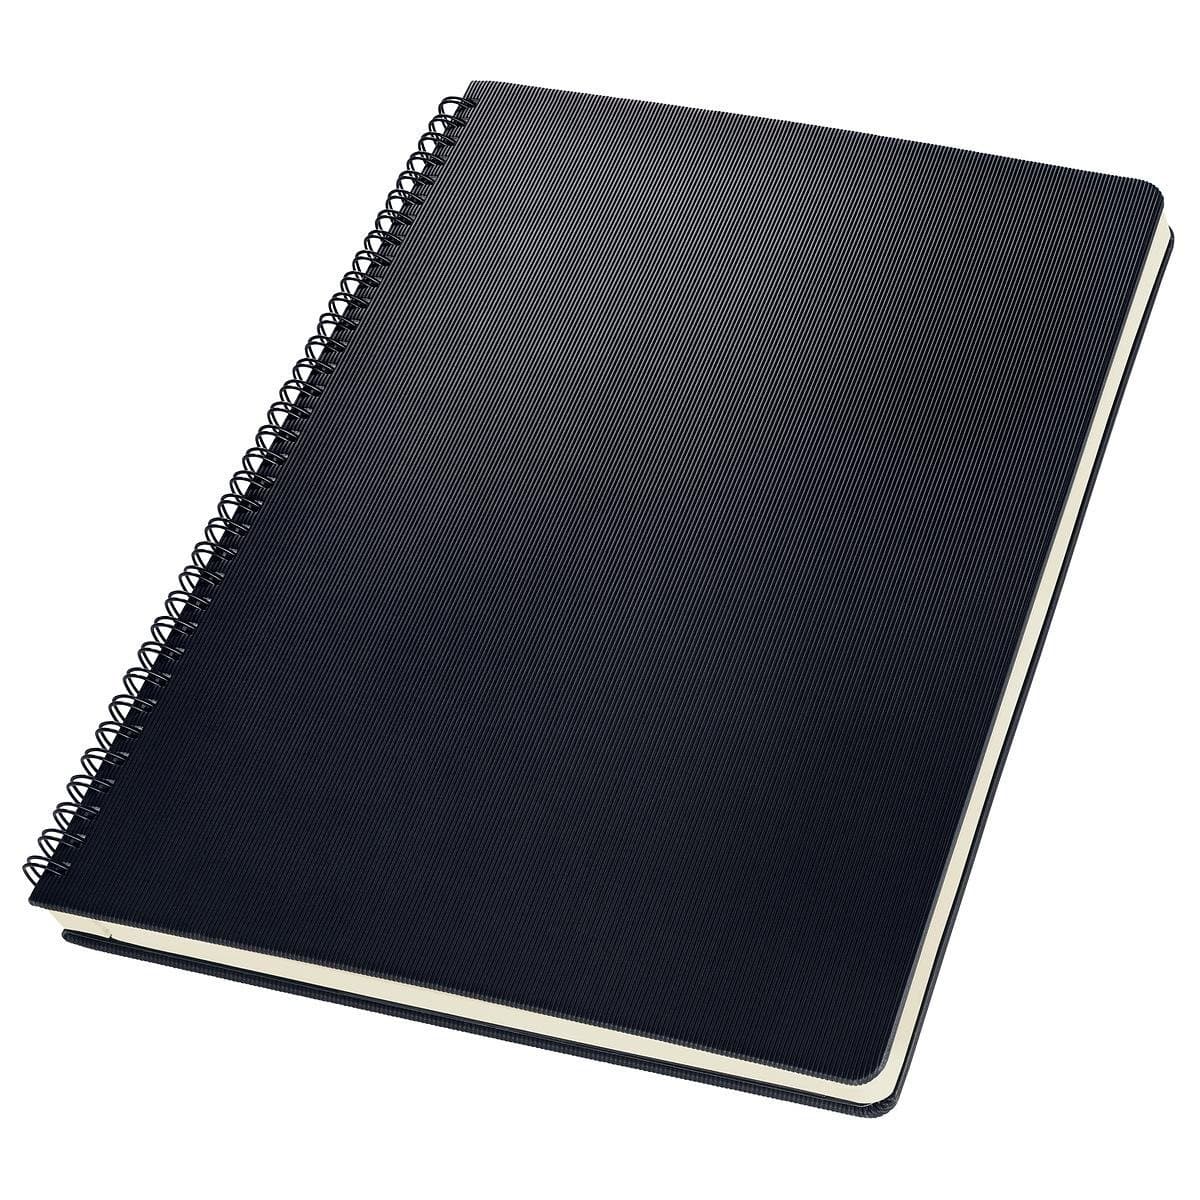 online shopping sites for stationery stationery delivery dubai buy cute notebooks online al masam stationery dubai